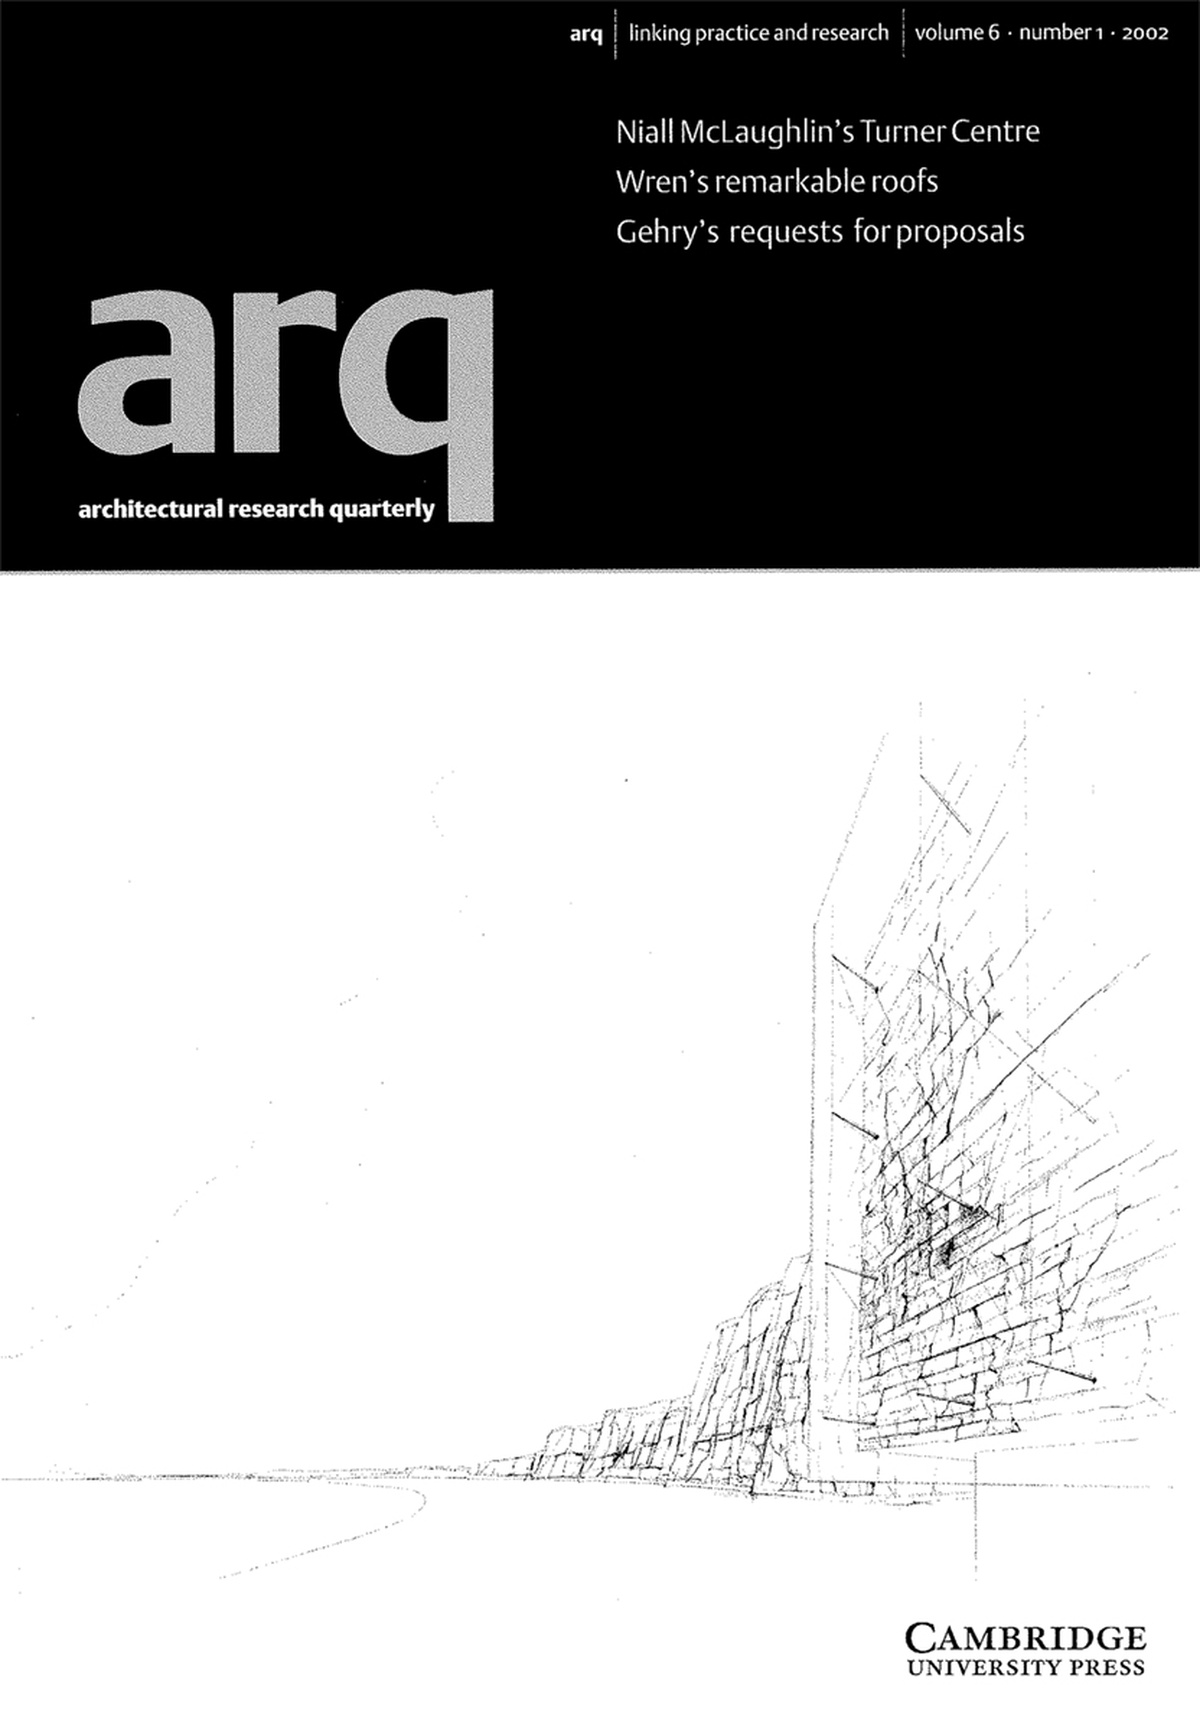 Turner Centre, Margate, Competition Entry Architecture - Research Quarterly